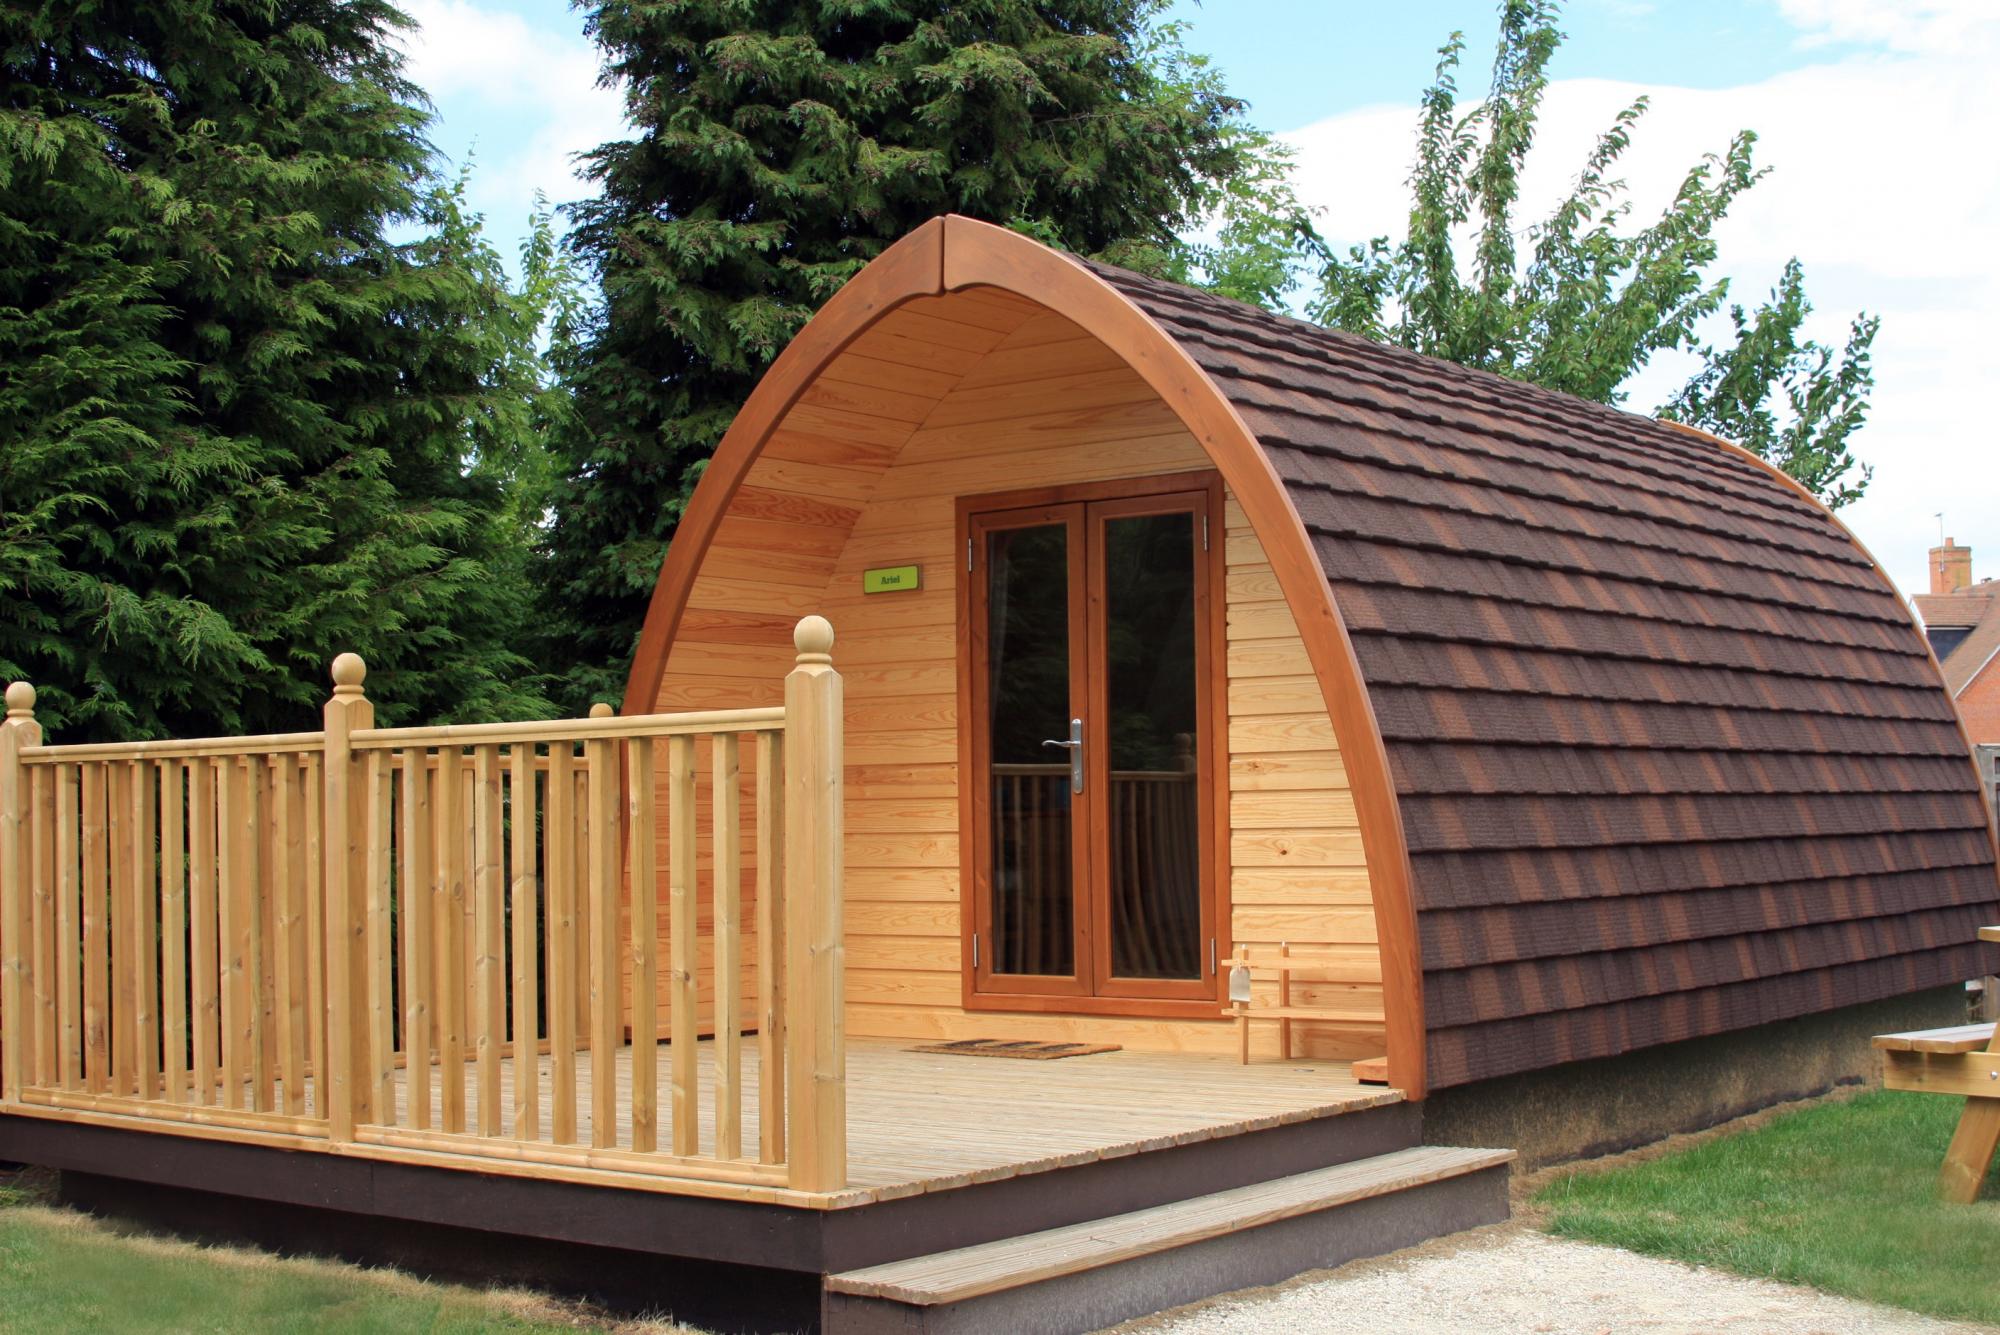 Wooden camping pod